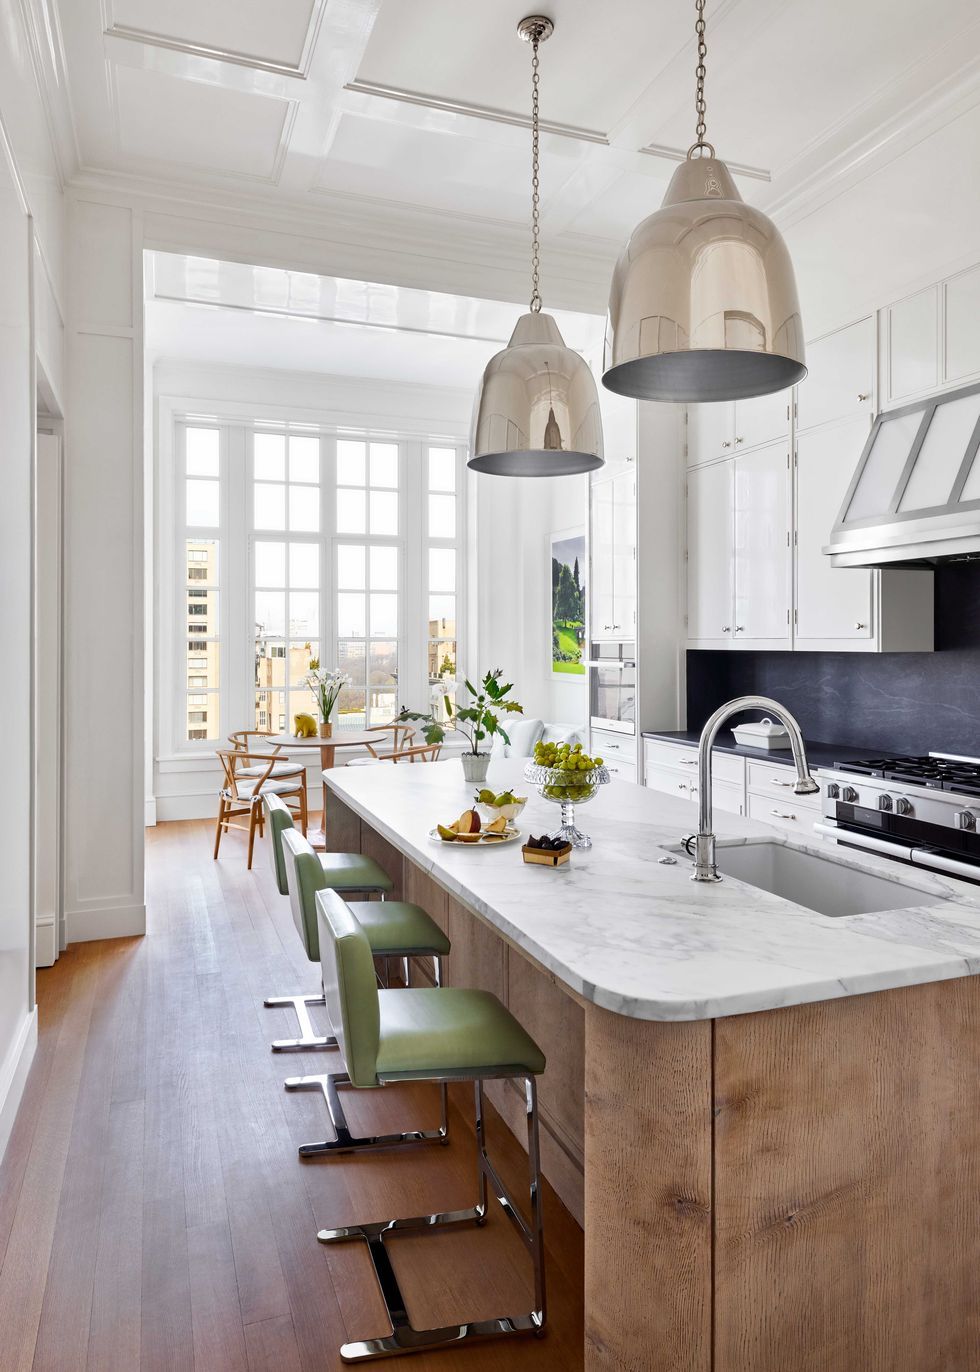 13 Kitchen Counter Decor Ideas You Should Totally Copy for